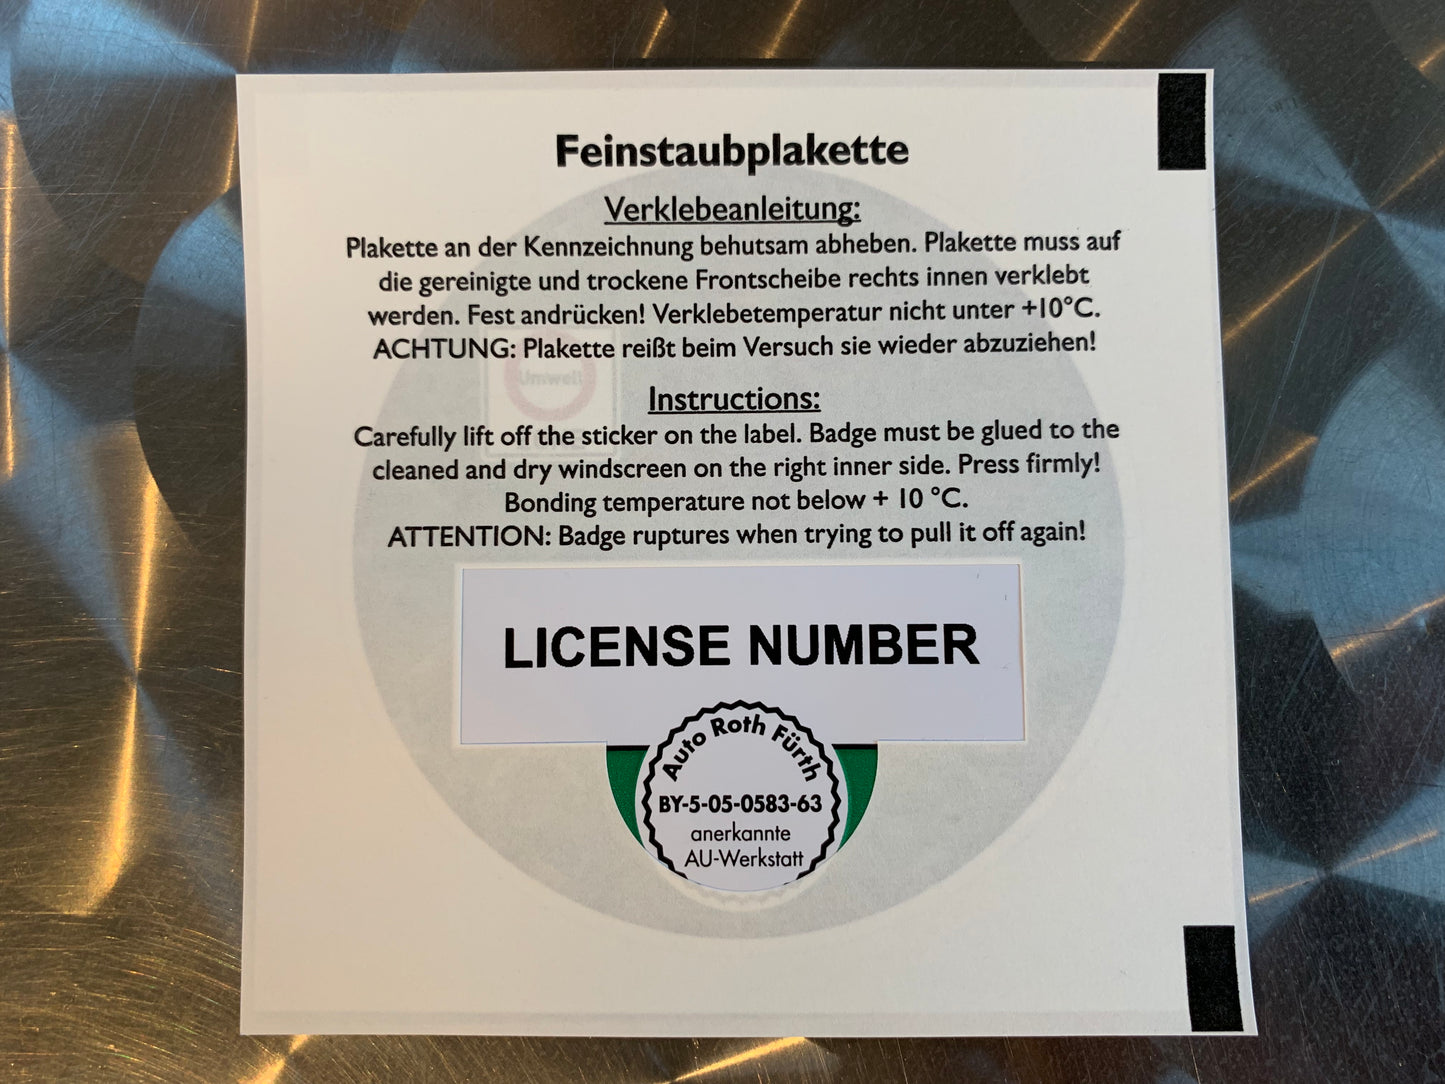 Environmental badge for foreign vehicles registrations - for german green zones